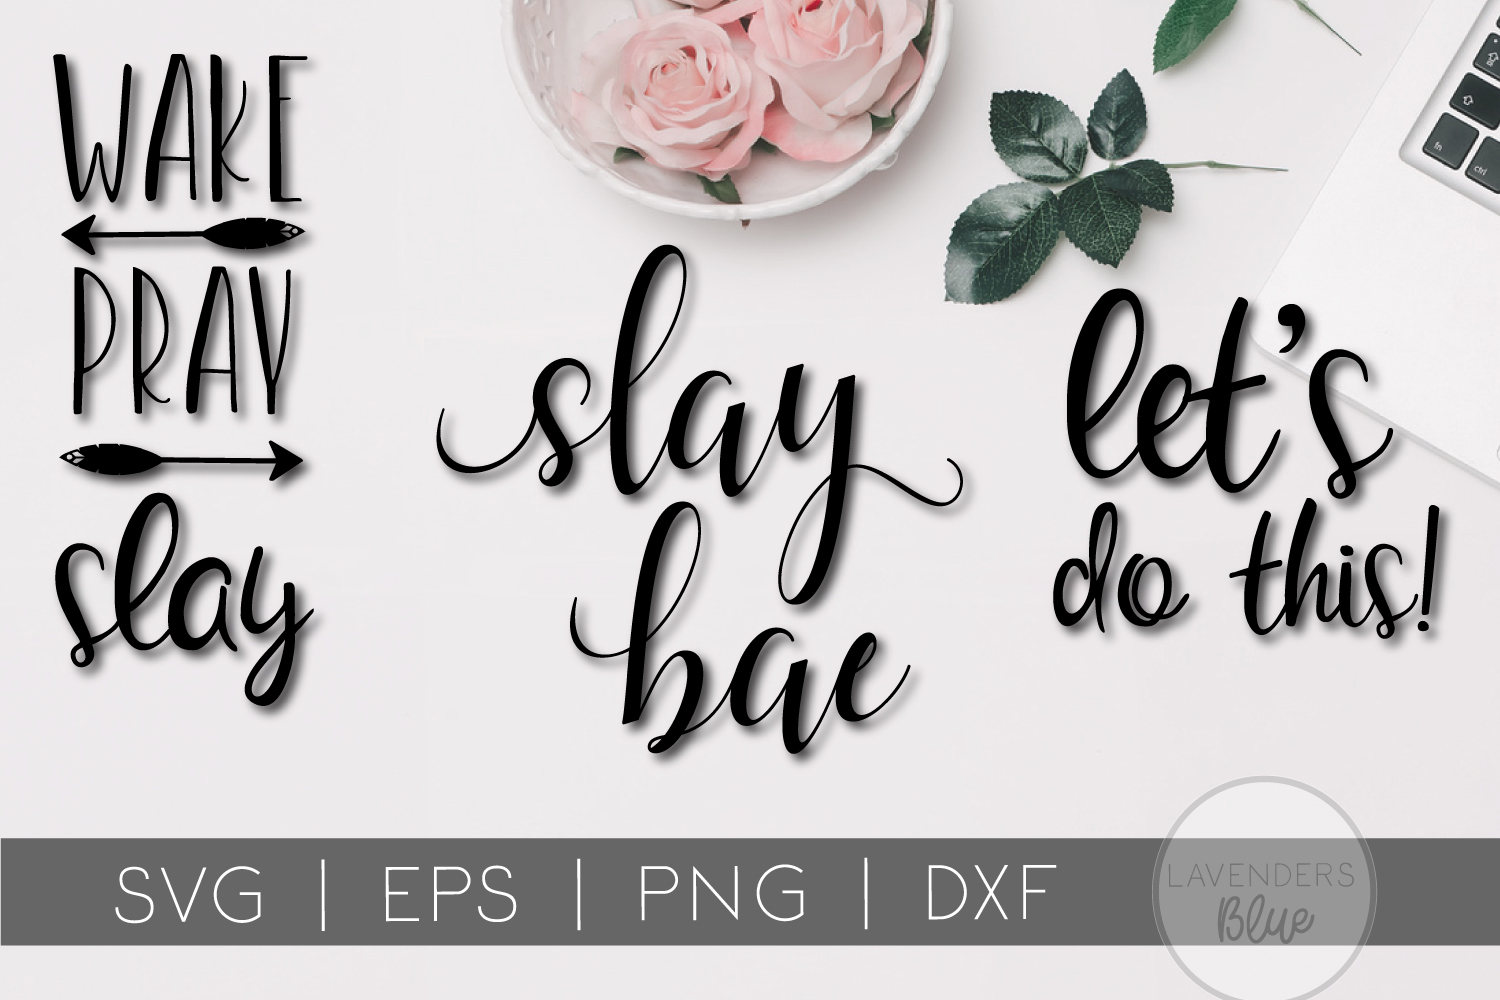 Download SVG Quotes 'Girl Hustle Bundle' 15 Inspirational Quotes